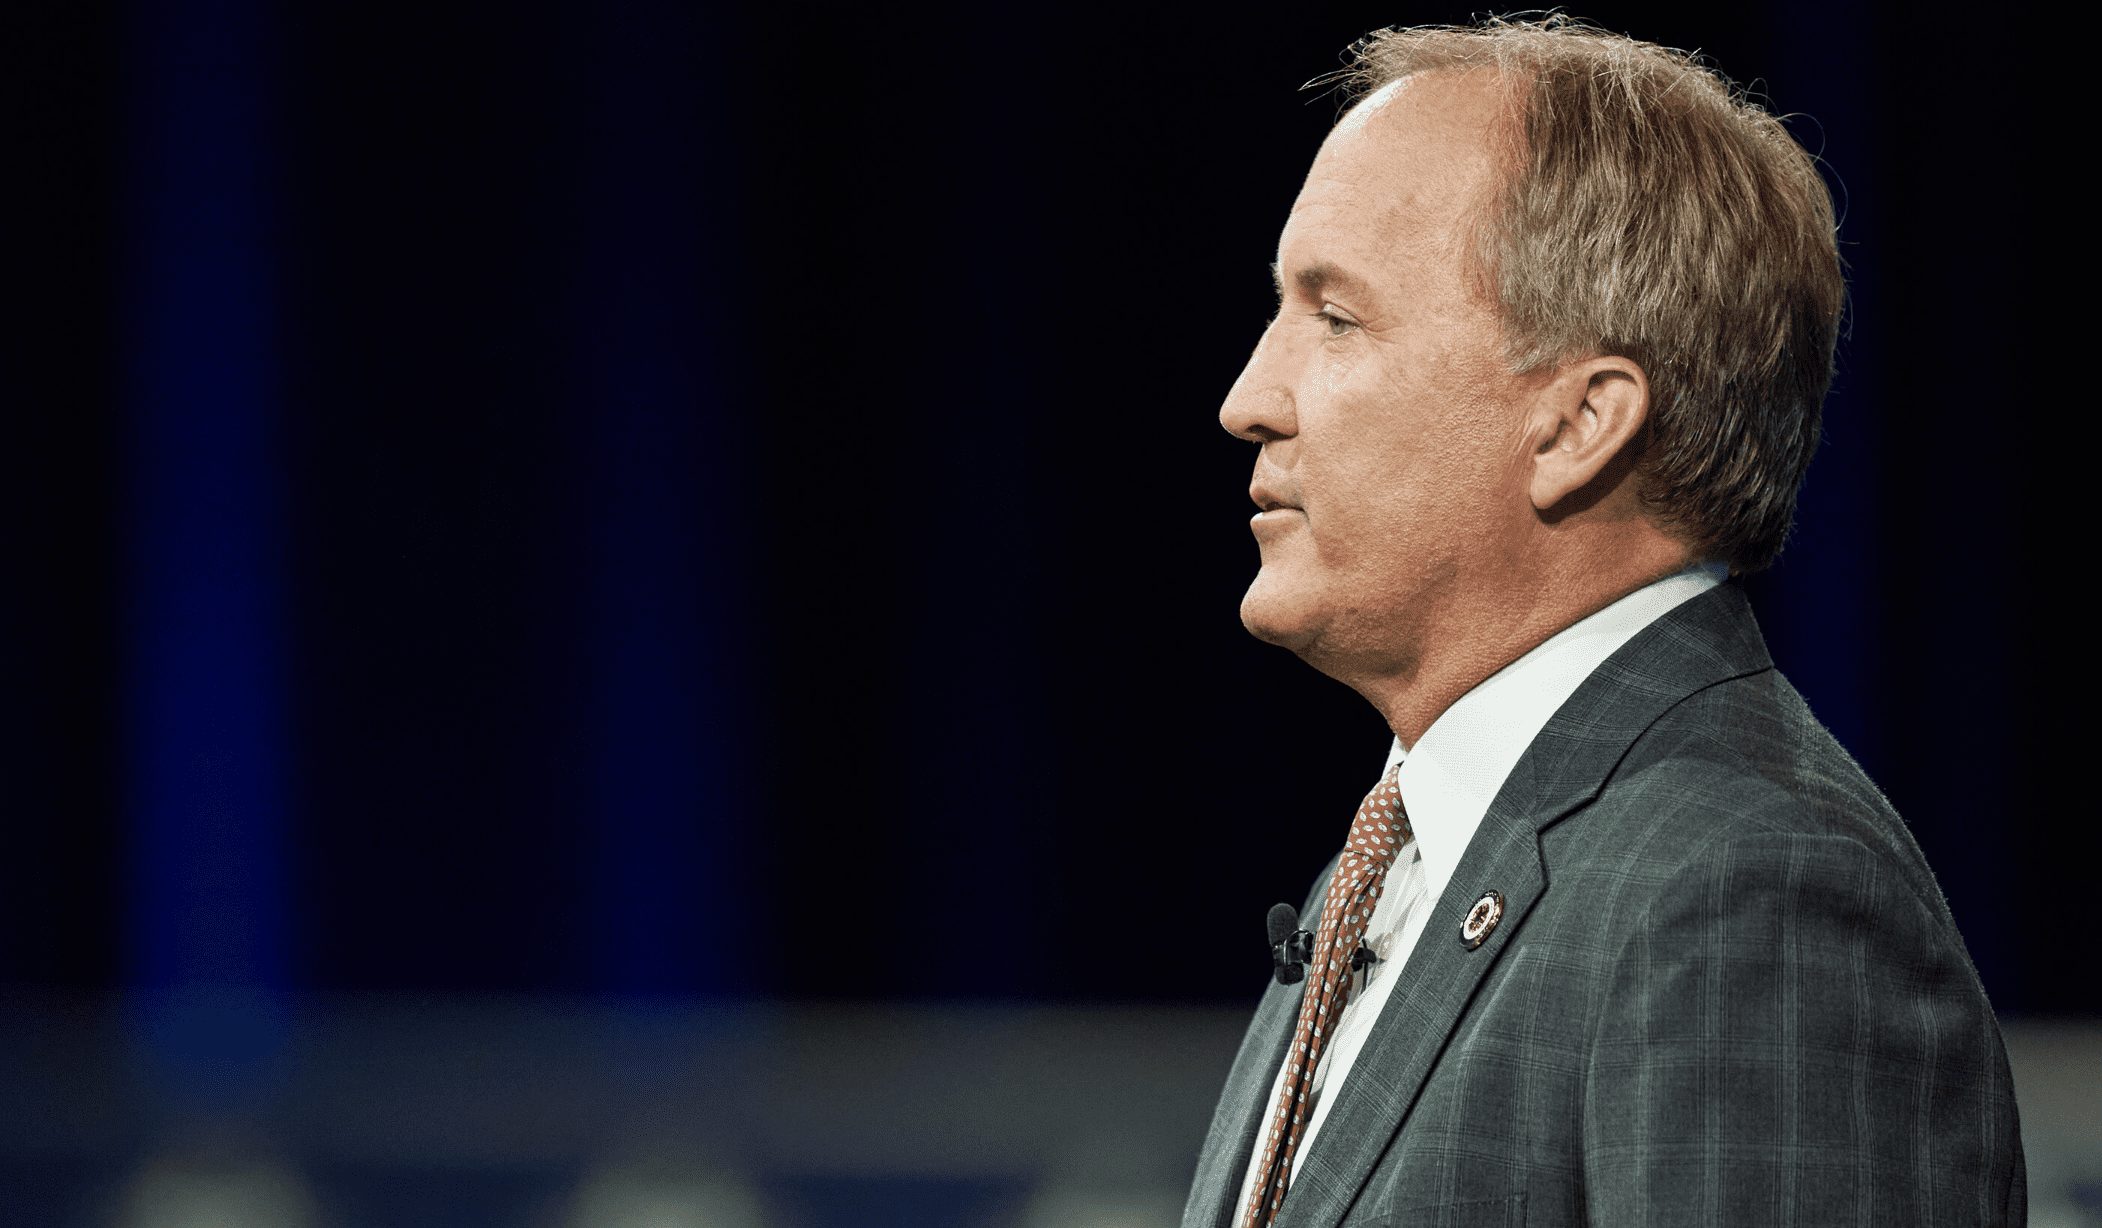 Paxton Sues Biden For Requiring Doctors to Provide Abortions in Emergencies